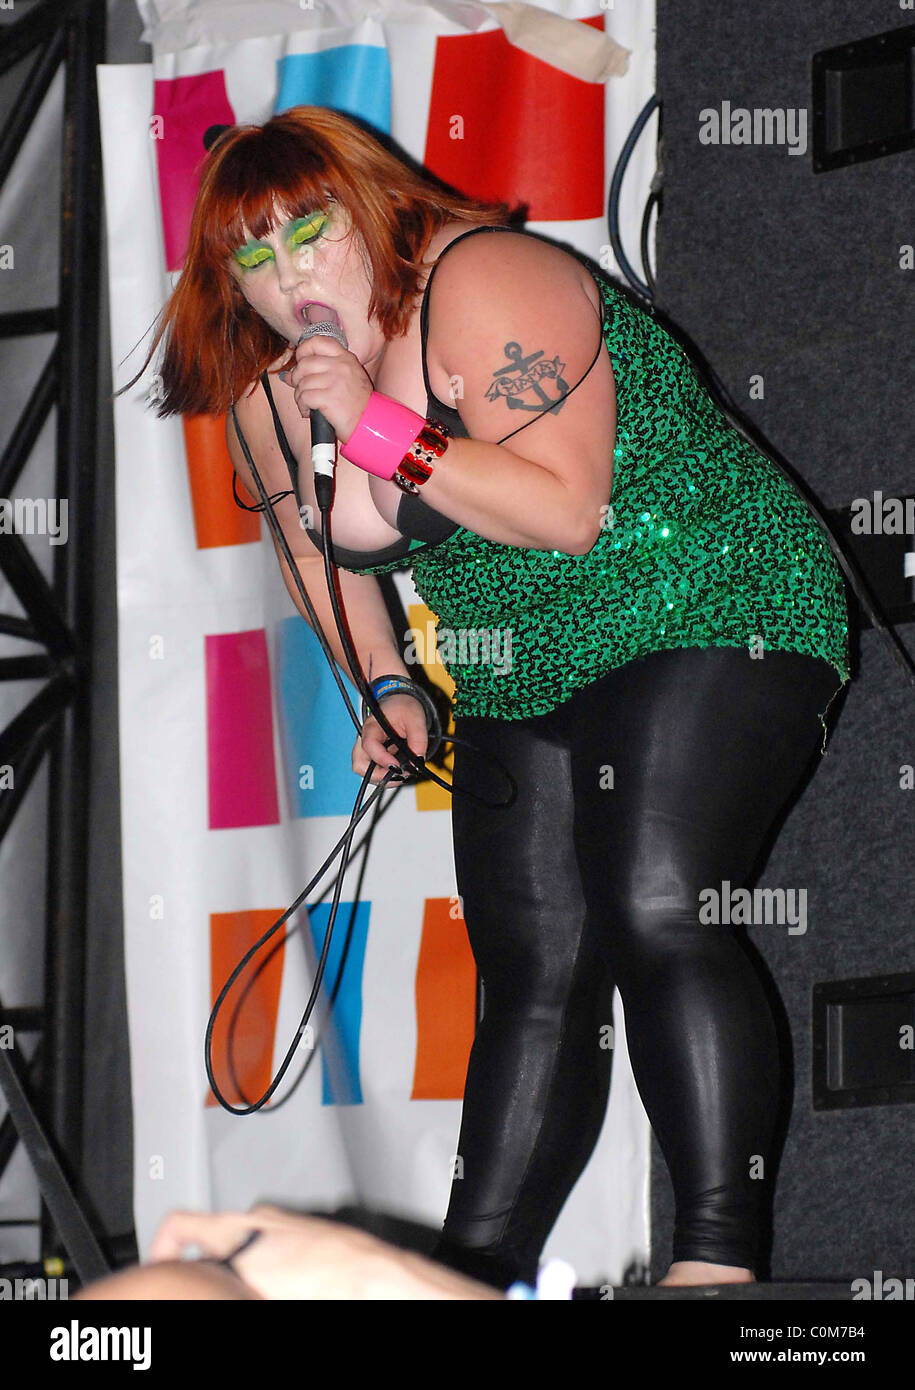 Beth Ditto of The Gossip Performing at Day 3 of The Electric Picnic Festival County Laois, Ireland - 31.08.08 Stock Photo